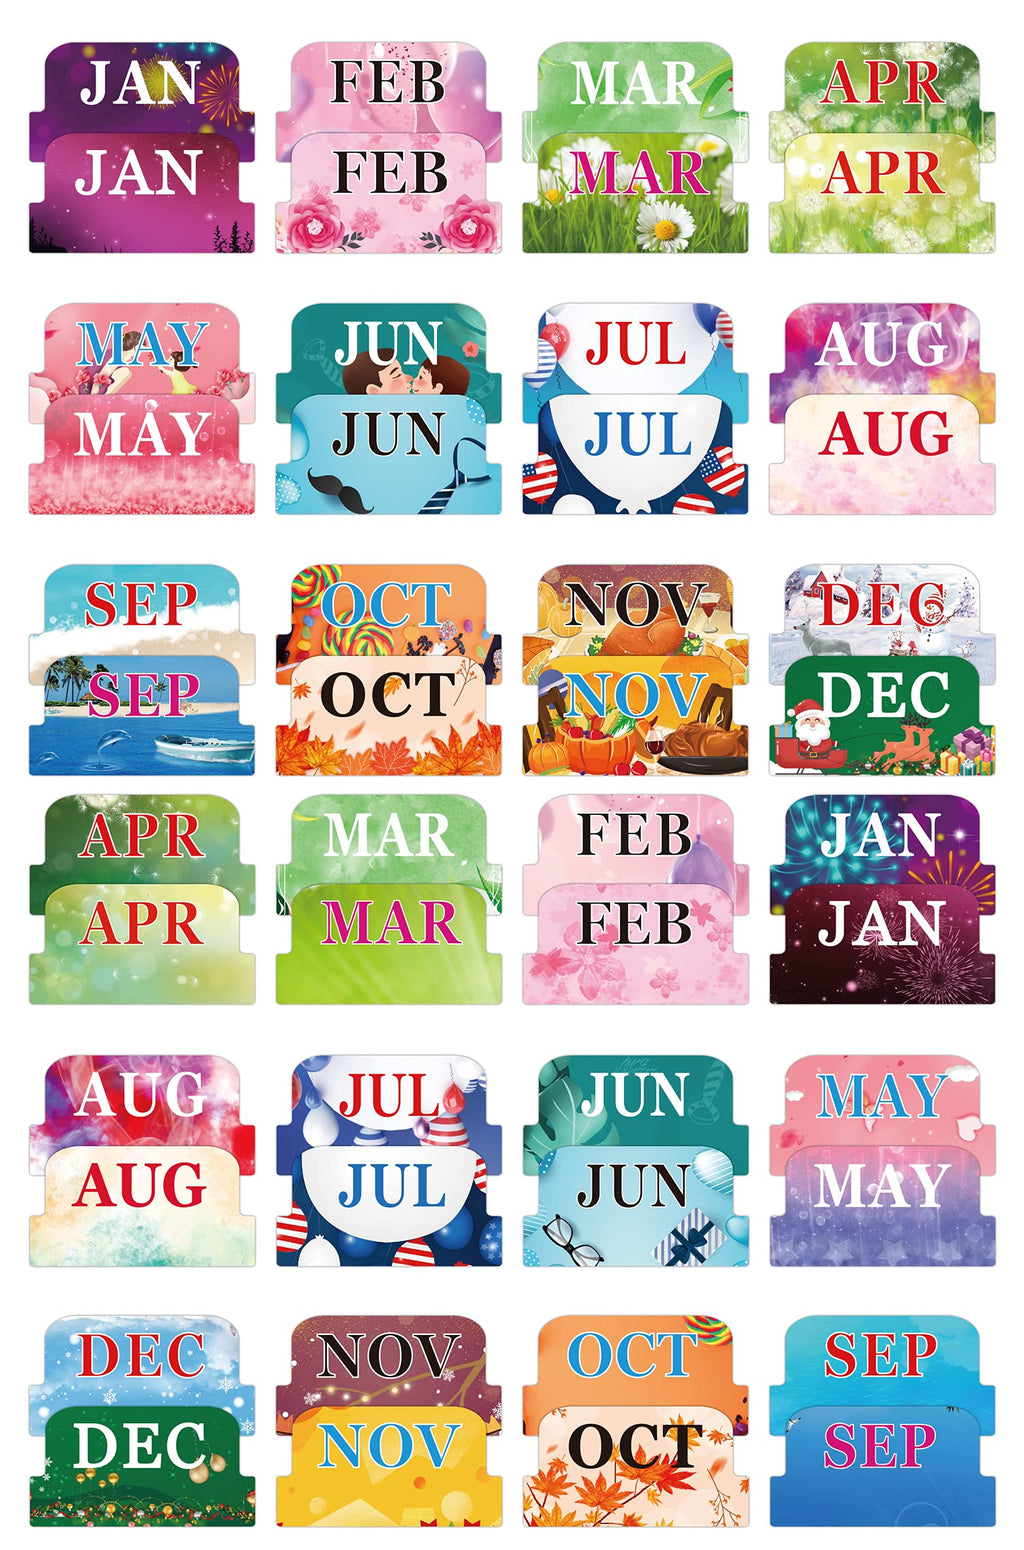  [AUSTRALIA] - 48 Pieces Colorful Monthly Adhesive Tabs, 4 Sheets Monthly Divider Tabs, 1-12 Months per Sheet, Durable Waterproof Monthly Calendar Index Tabs for Planners Journal and Notebook Organizations